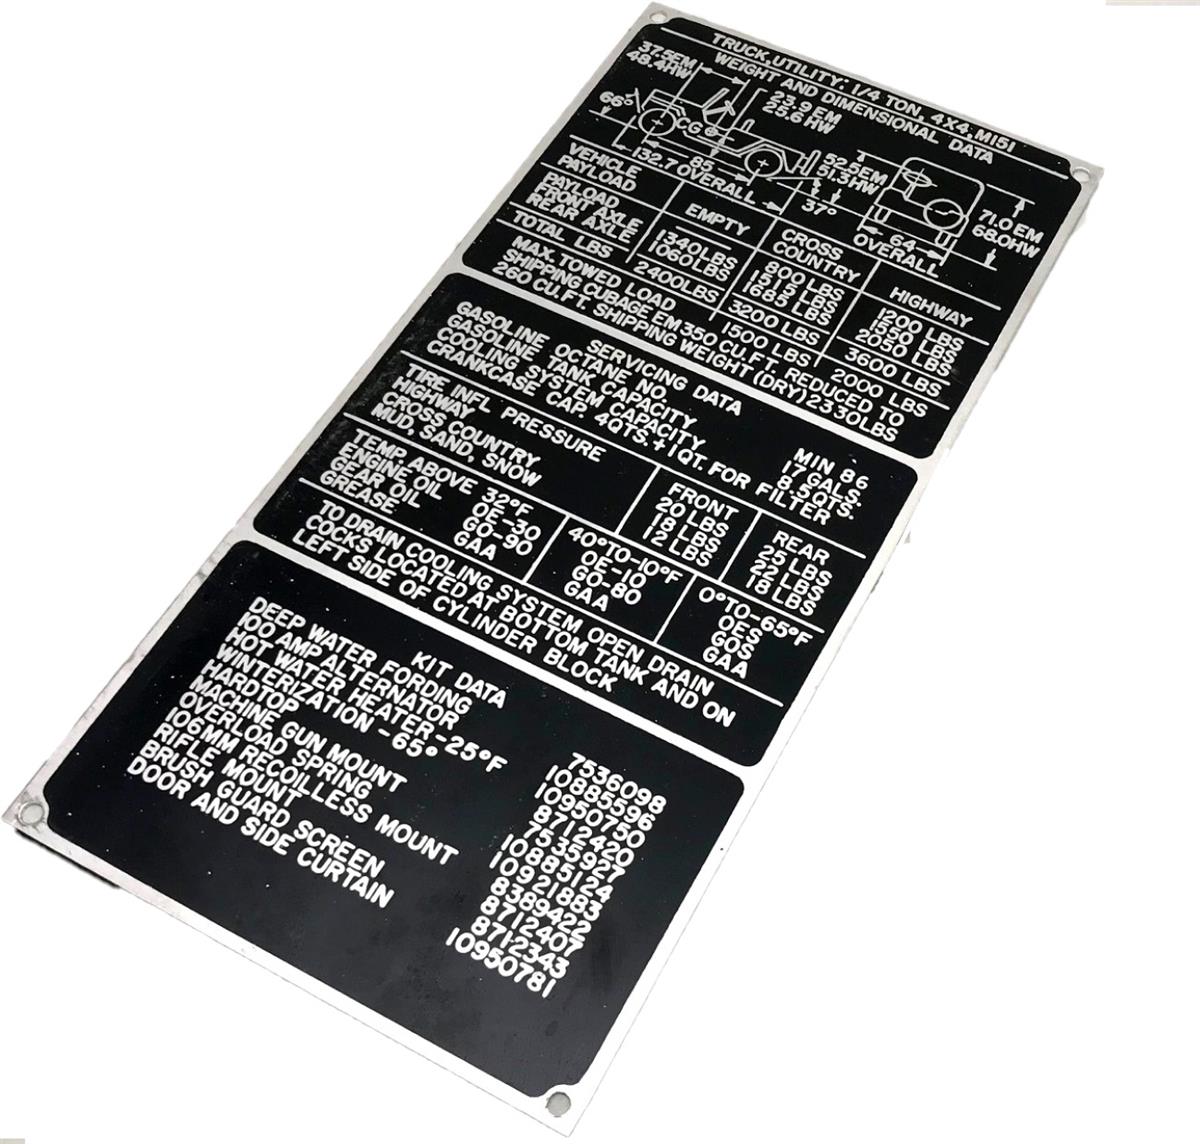 DT-546 | DT-546 M151 Weight and Dimensional Data Plate (4).jpg